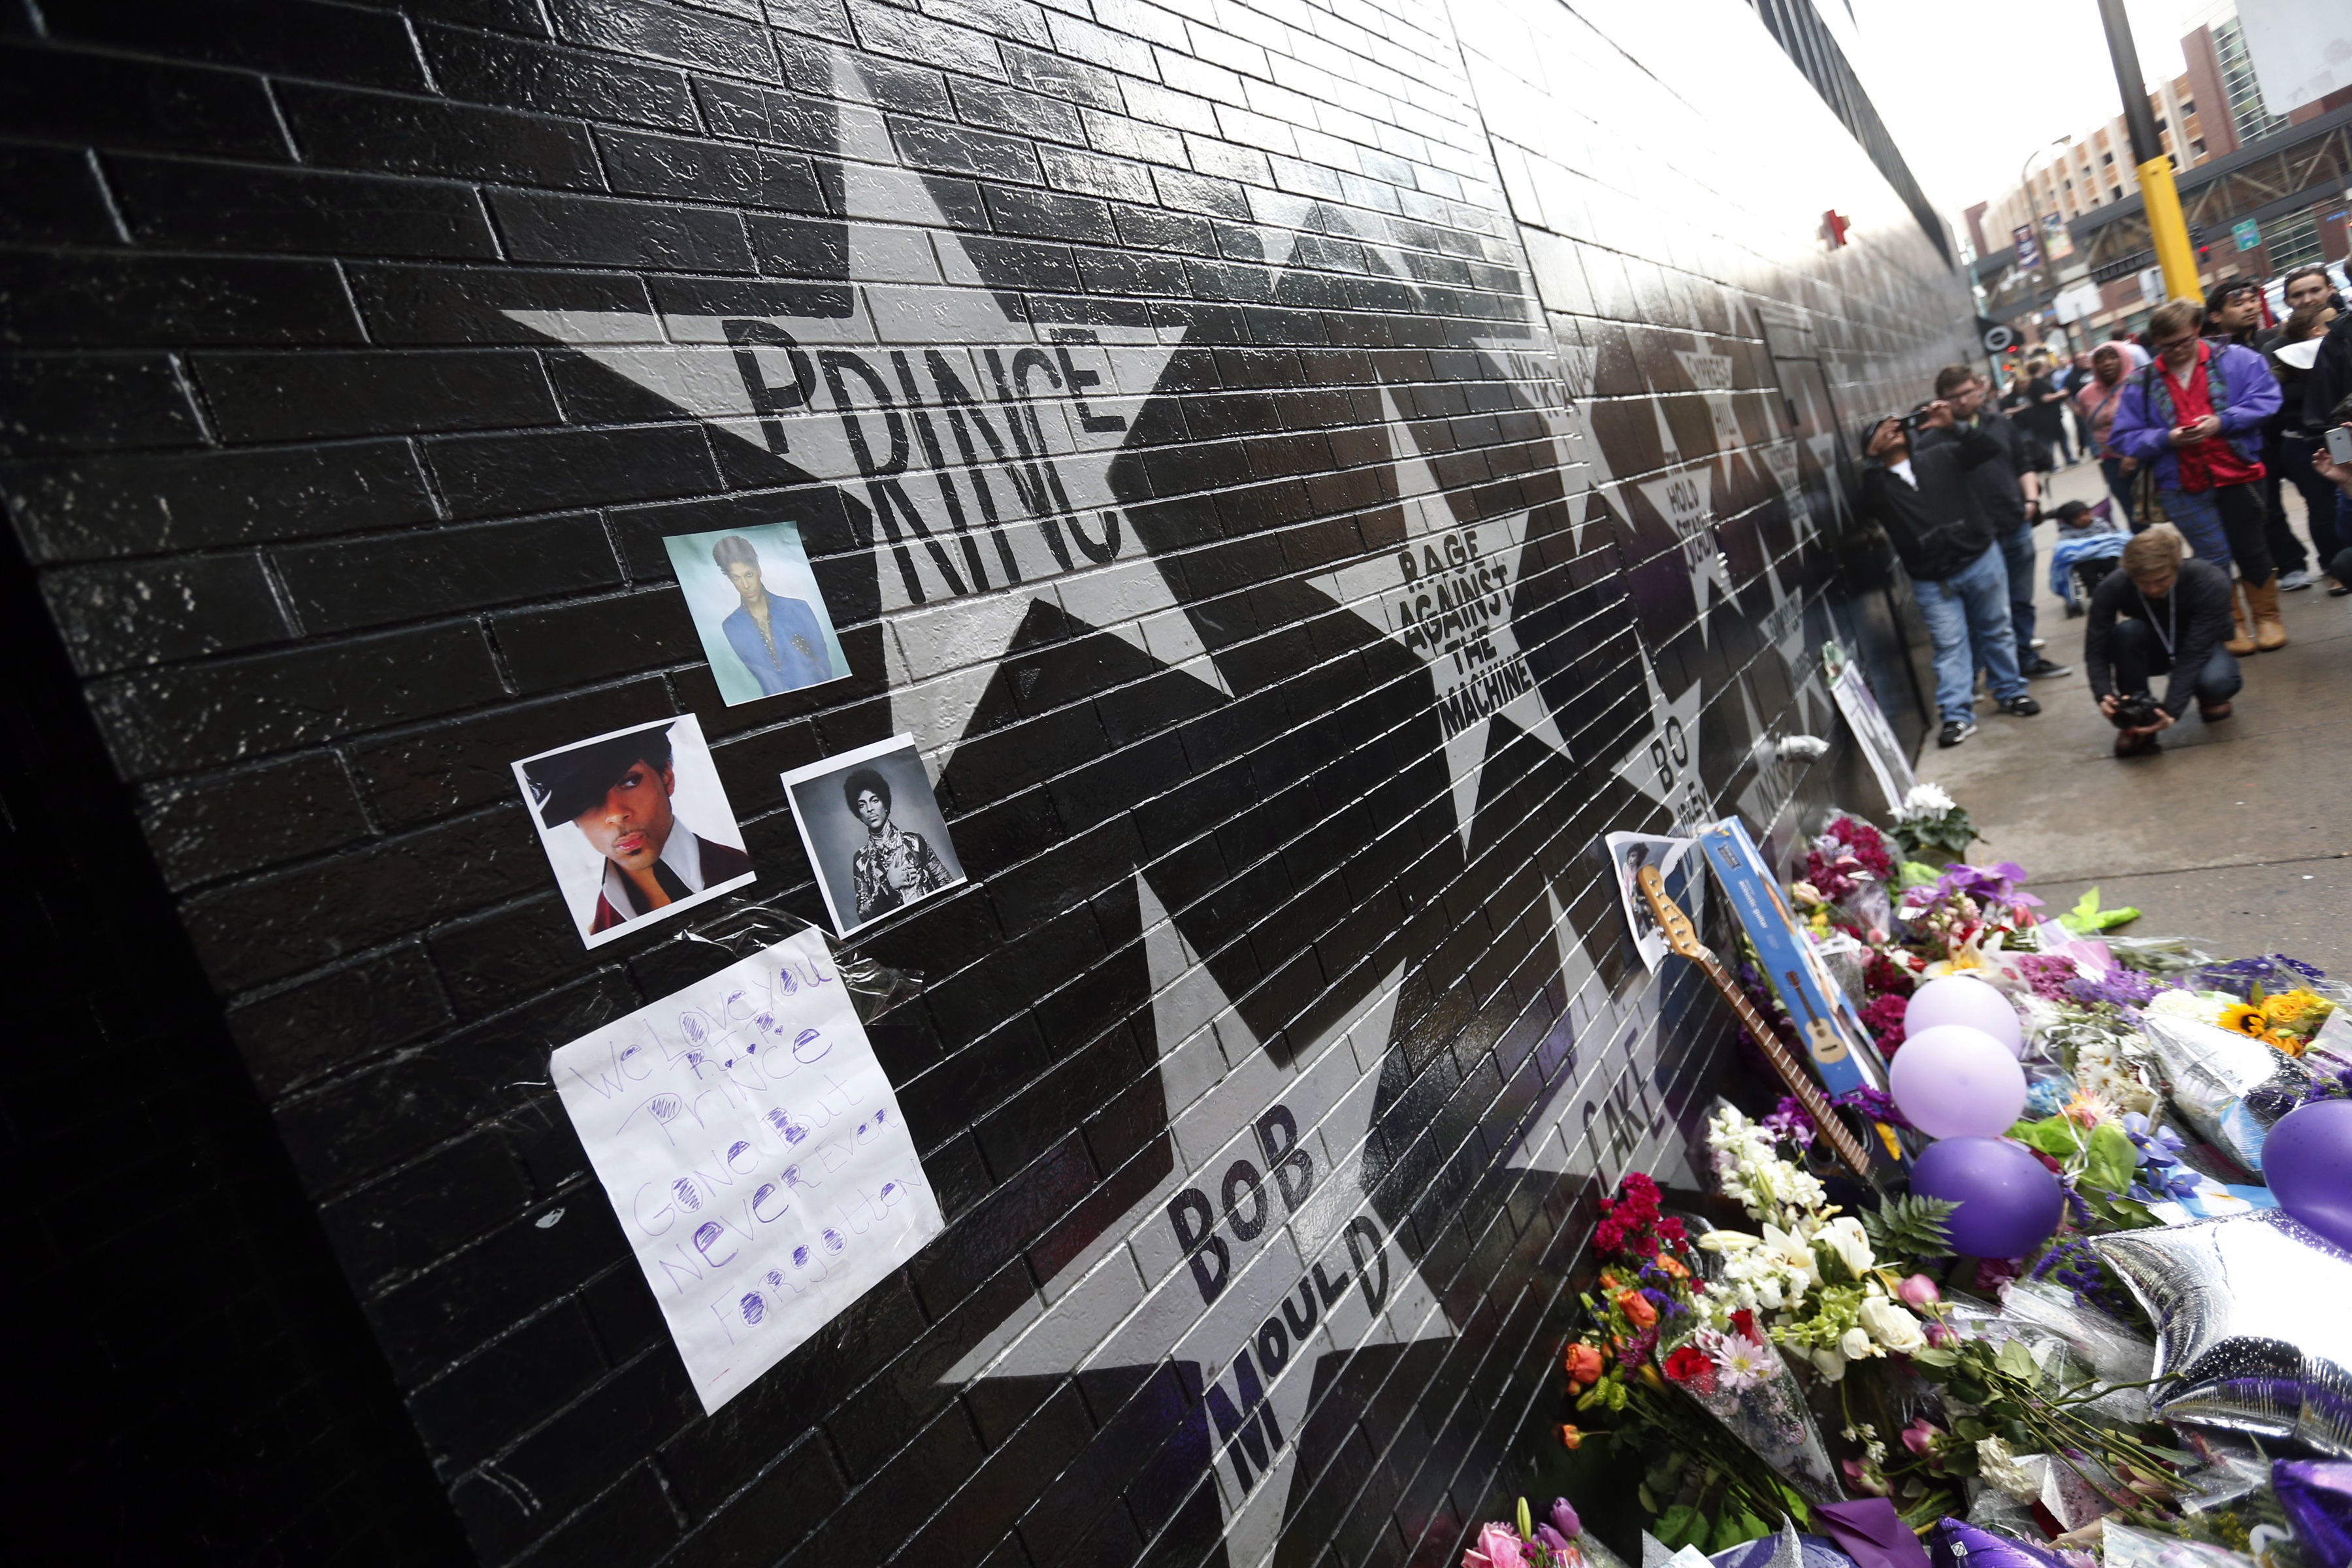 A memorial formed beneath Prince's star on the wall of First Avenue from www.citypages.com